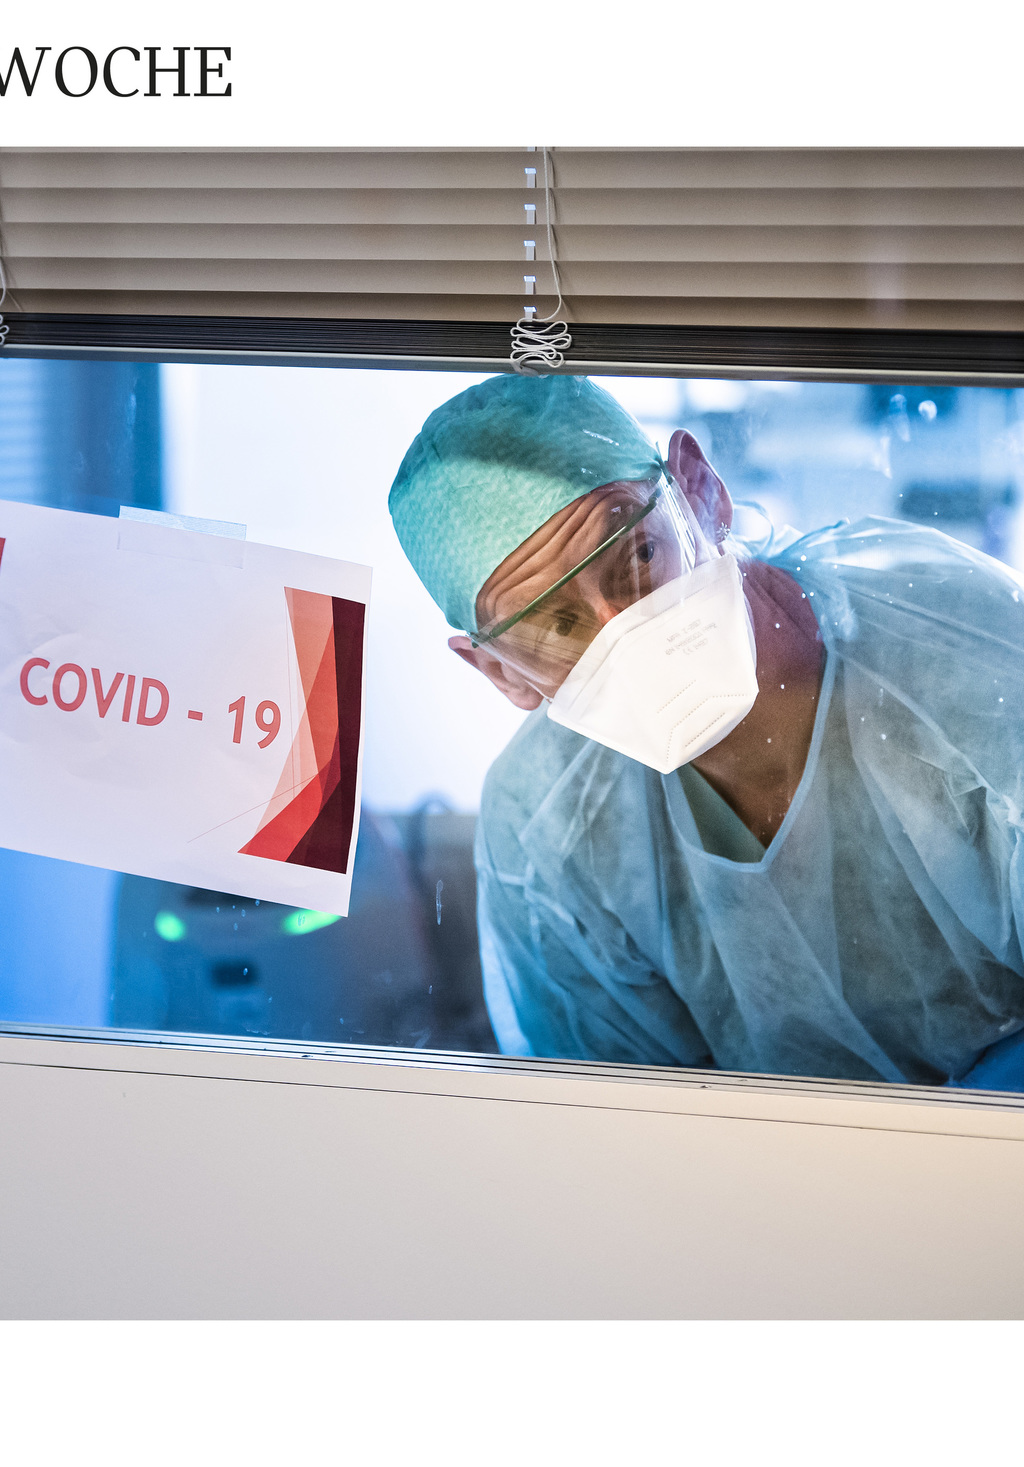 BILD DER WOCHE NATIONAL - Medical personnel at work in the intensive care unit of the Sion hospital (Hopital de Sion) during the coronavirus disease (COVID-19) outbreak in Sion, Switzerland, Wednesday, April 1, 2020. (KEYSTONE/Jean-Christophe Bott)